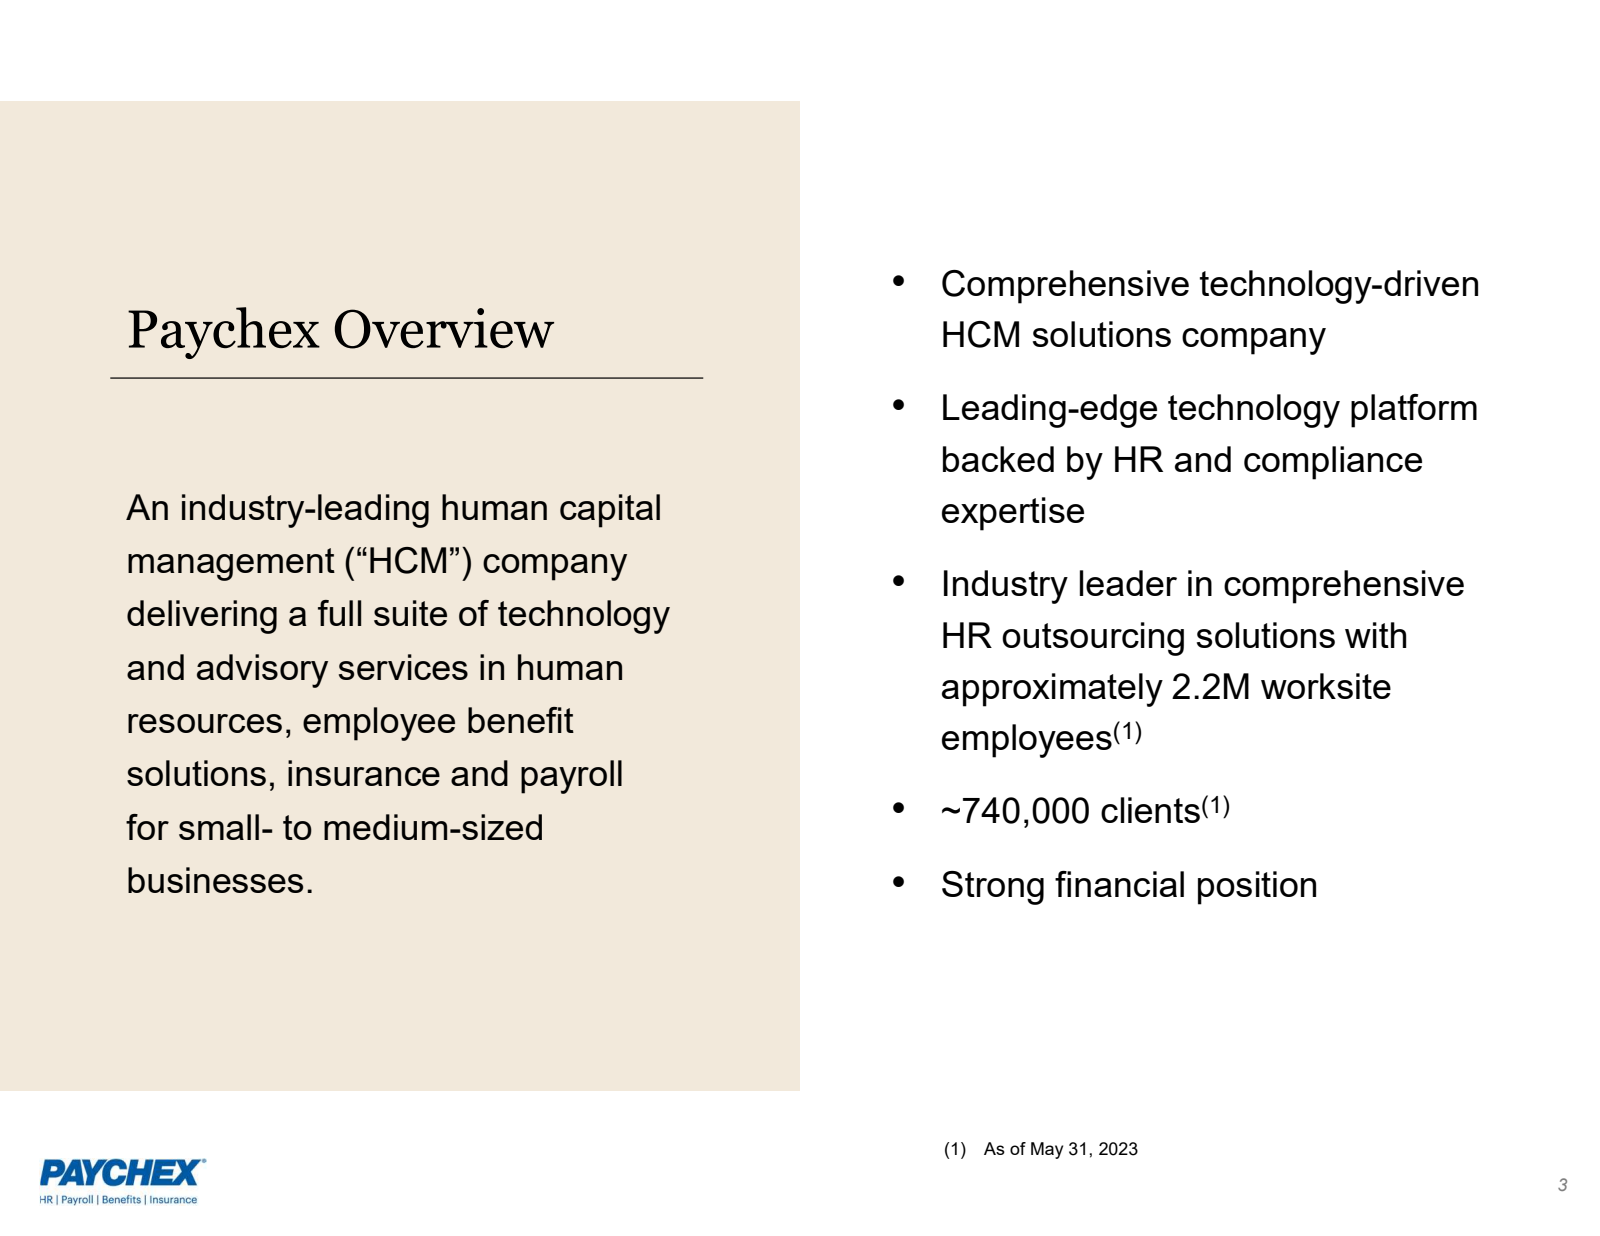 Paychex Overview 

A